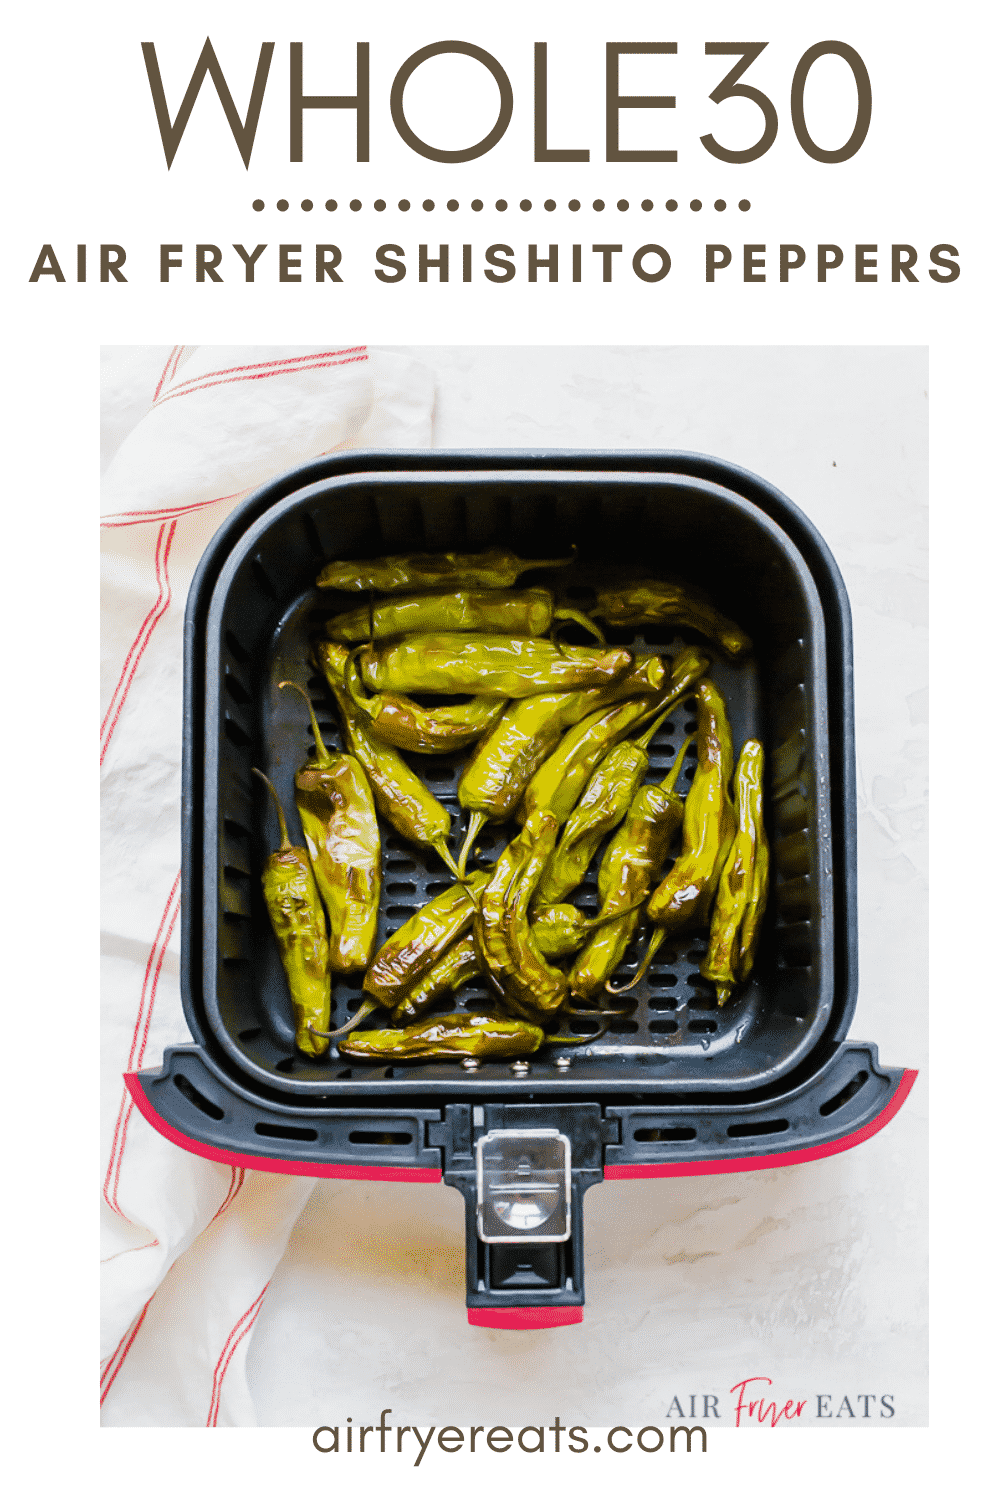 Air Fryer Shishito Peppers are a quick and delicious air fryer recipe. These blistered peppers are mild and make the perfect appetizer. You are going to fall in love with how easy this shishito pepper recipe is to make. #shishitopeppers #airfryerrecipes #airfryerpeppers via @vegetarianmamma